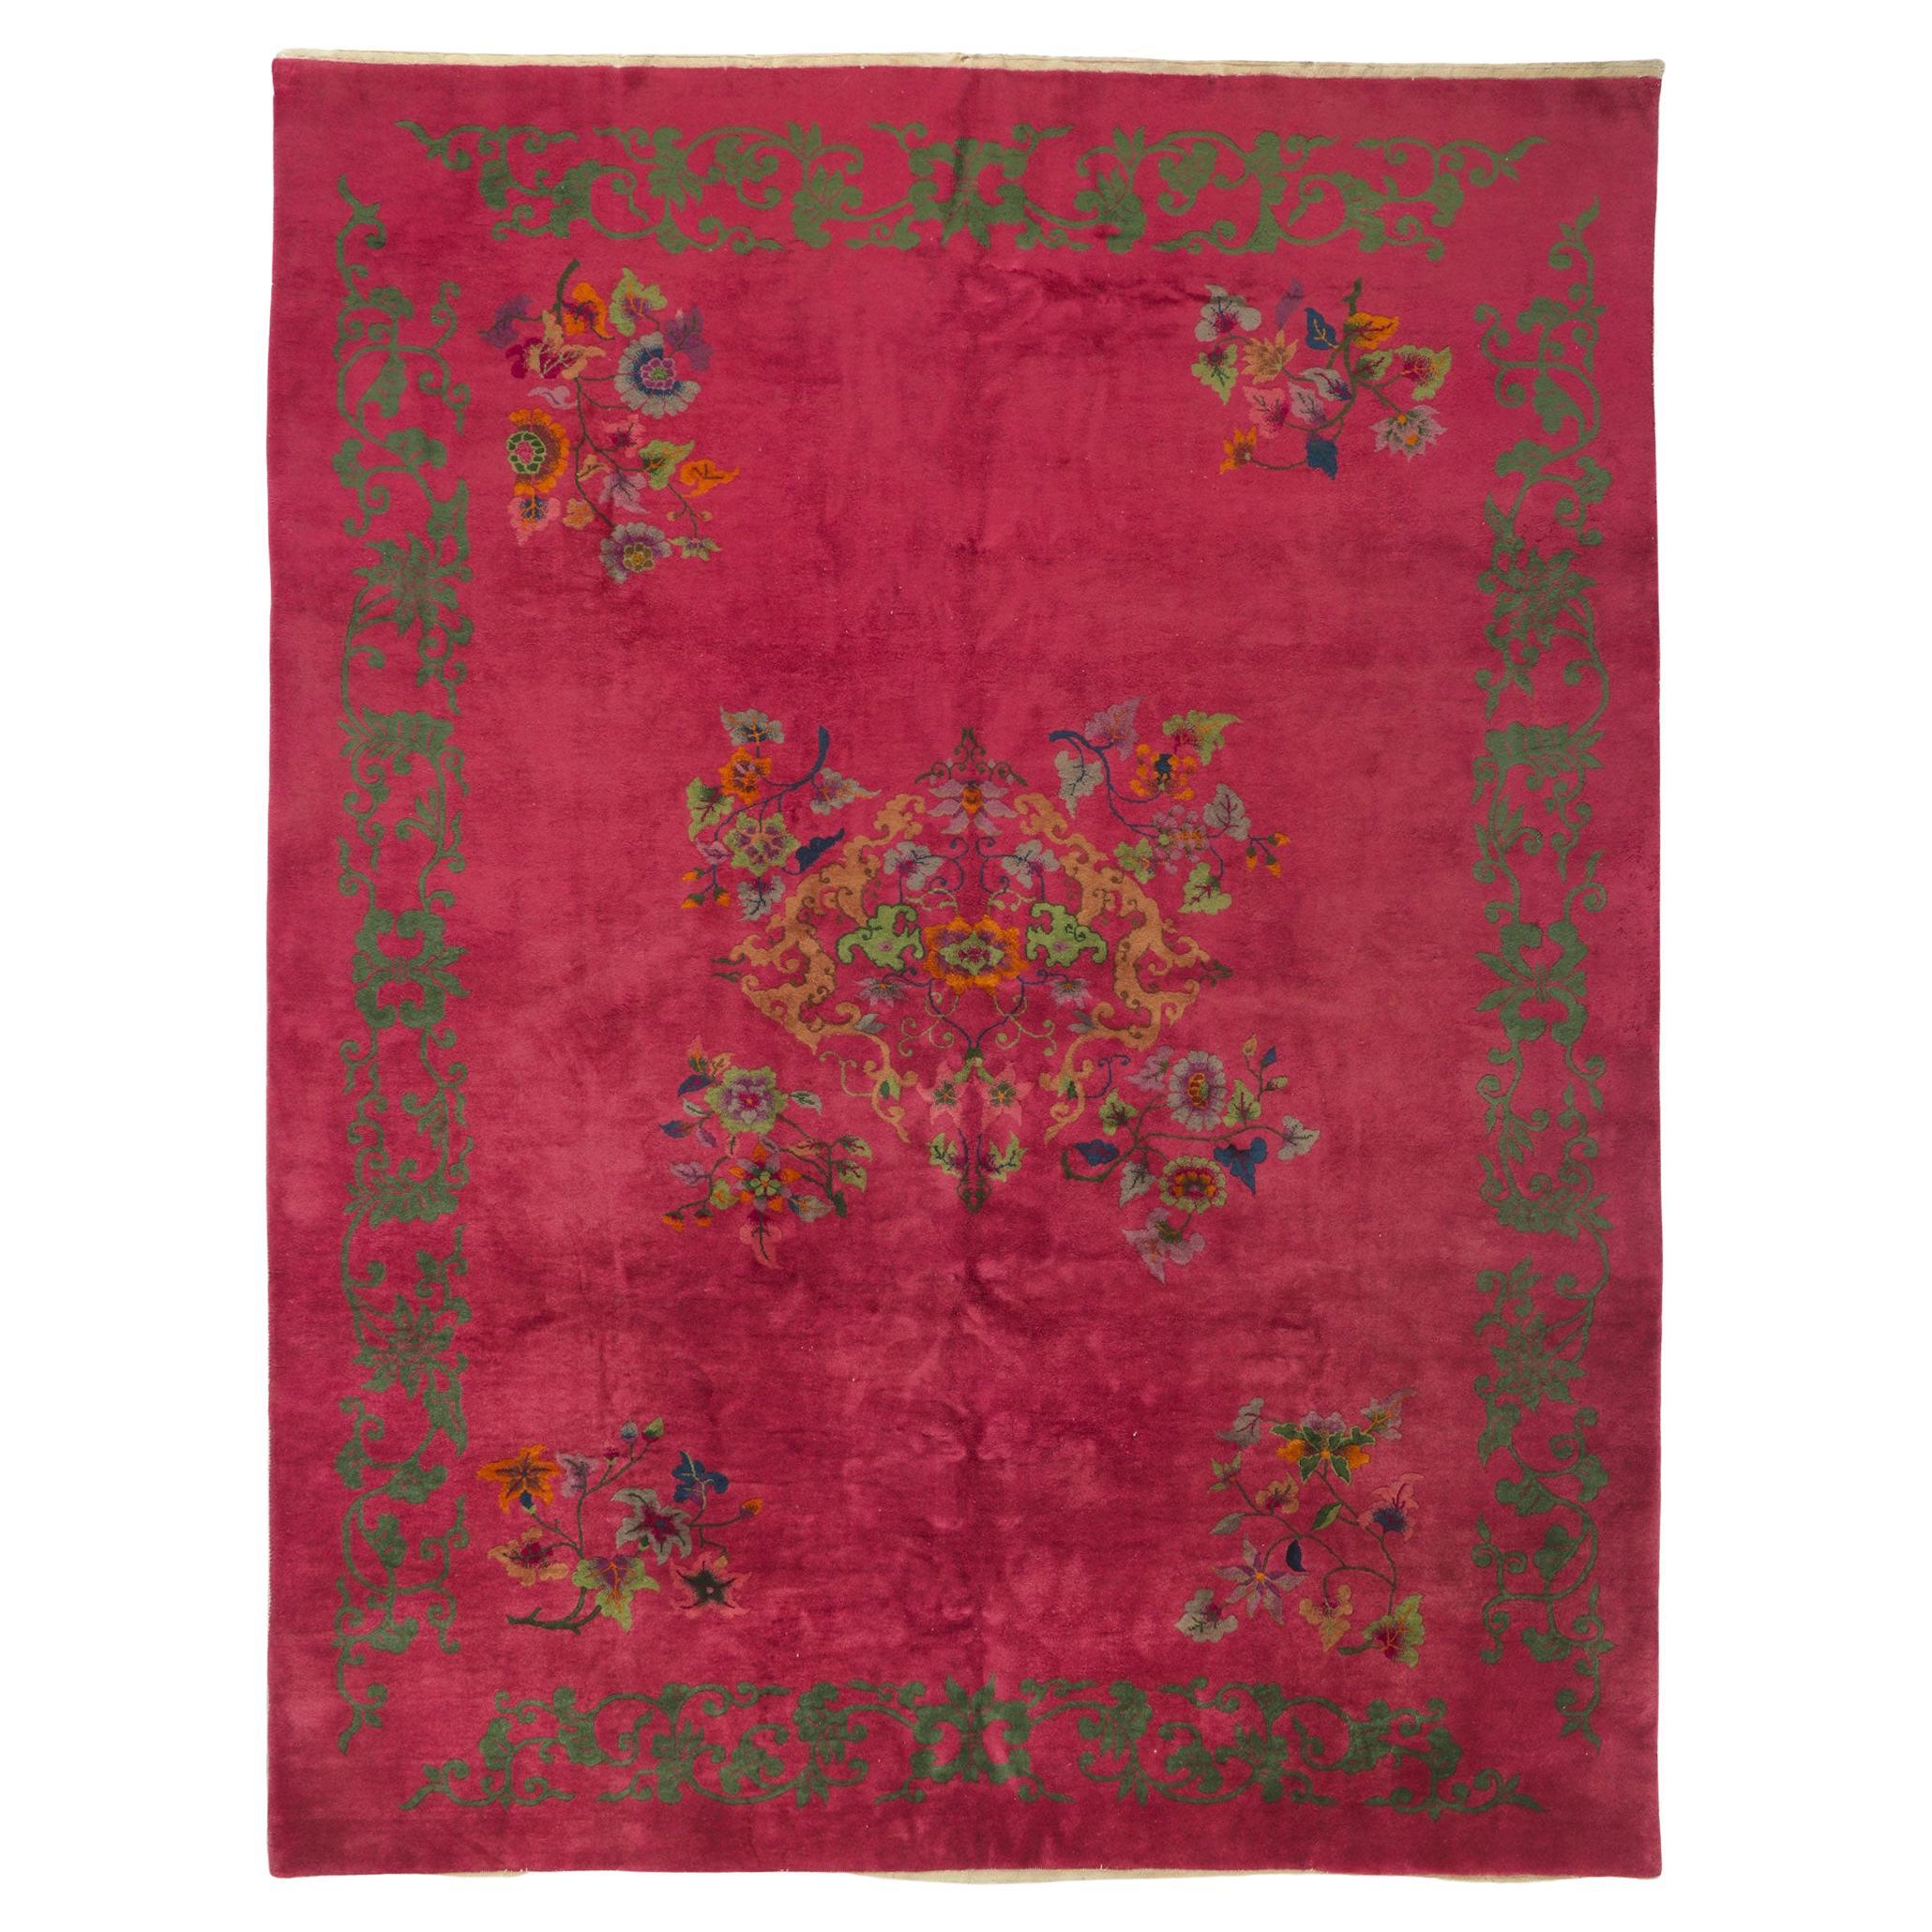 Antique Chinese Art Deco Rug, Sensual Decadence Meets Maximalist Style